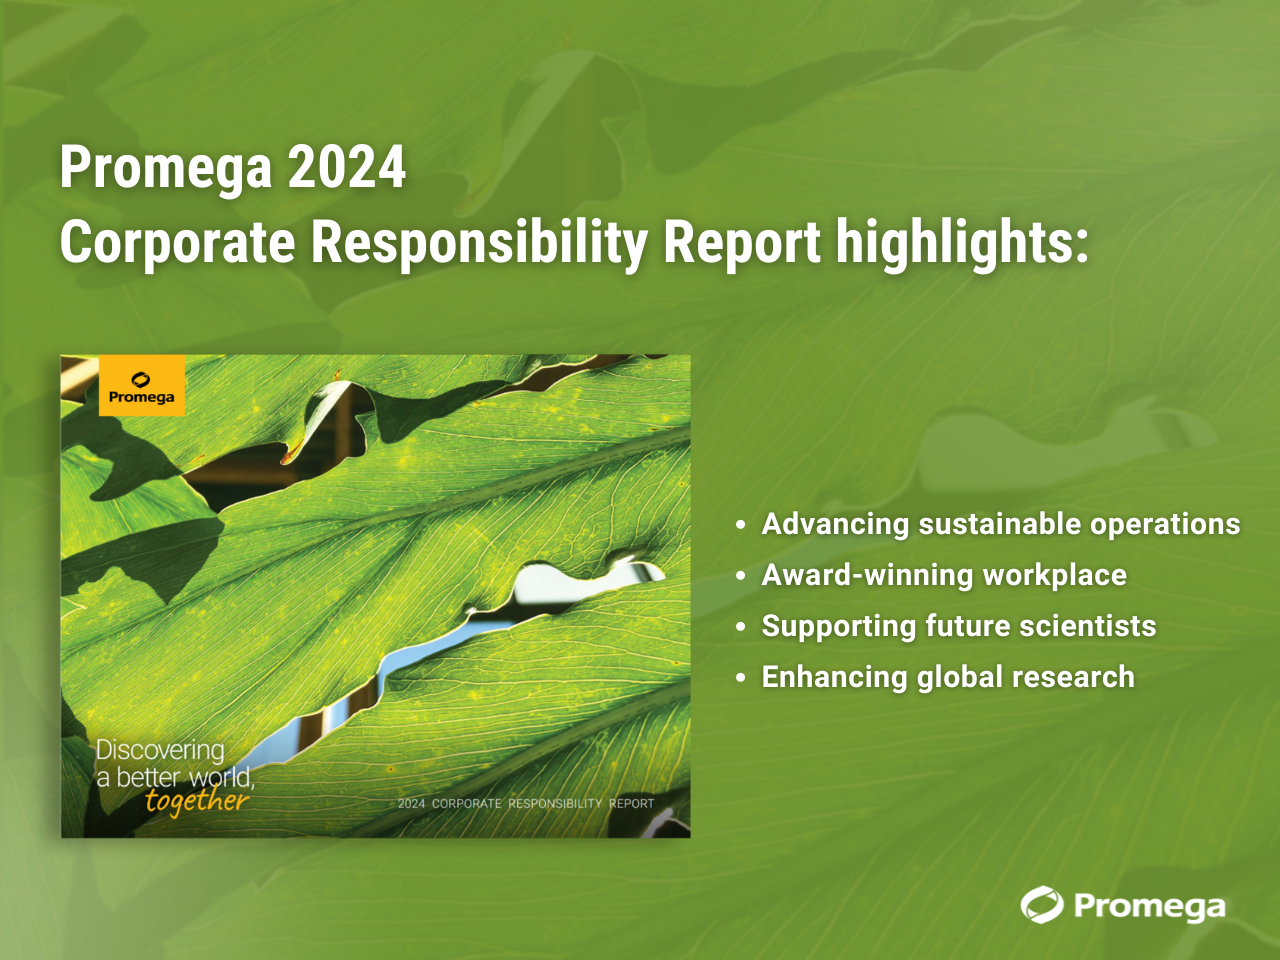 promega-2024-corporate-responsibility-report-highlights-2-1-1